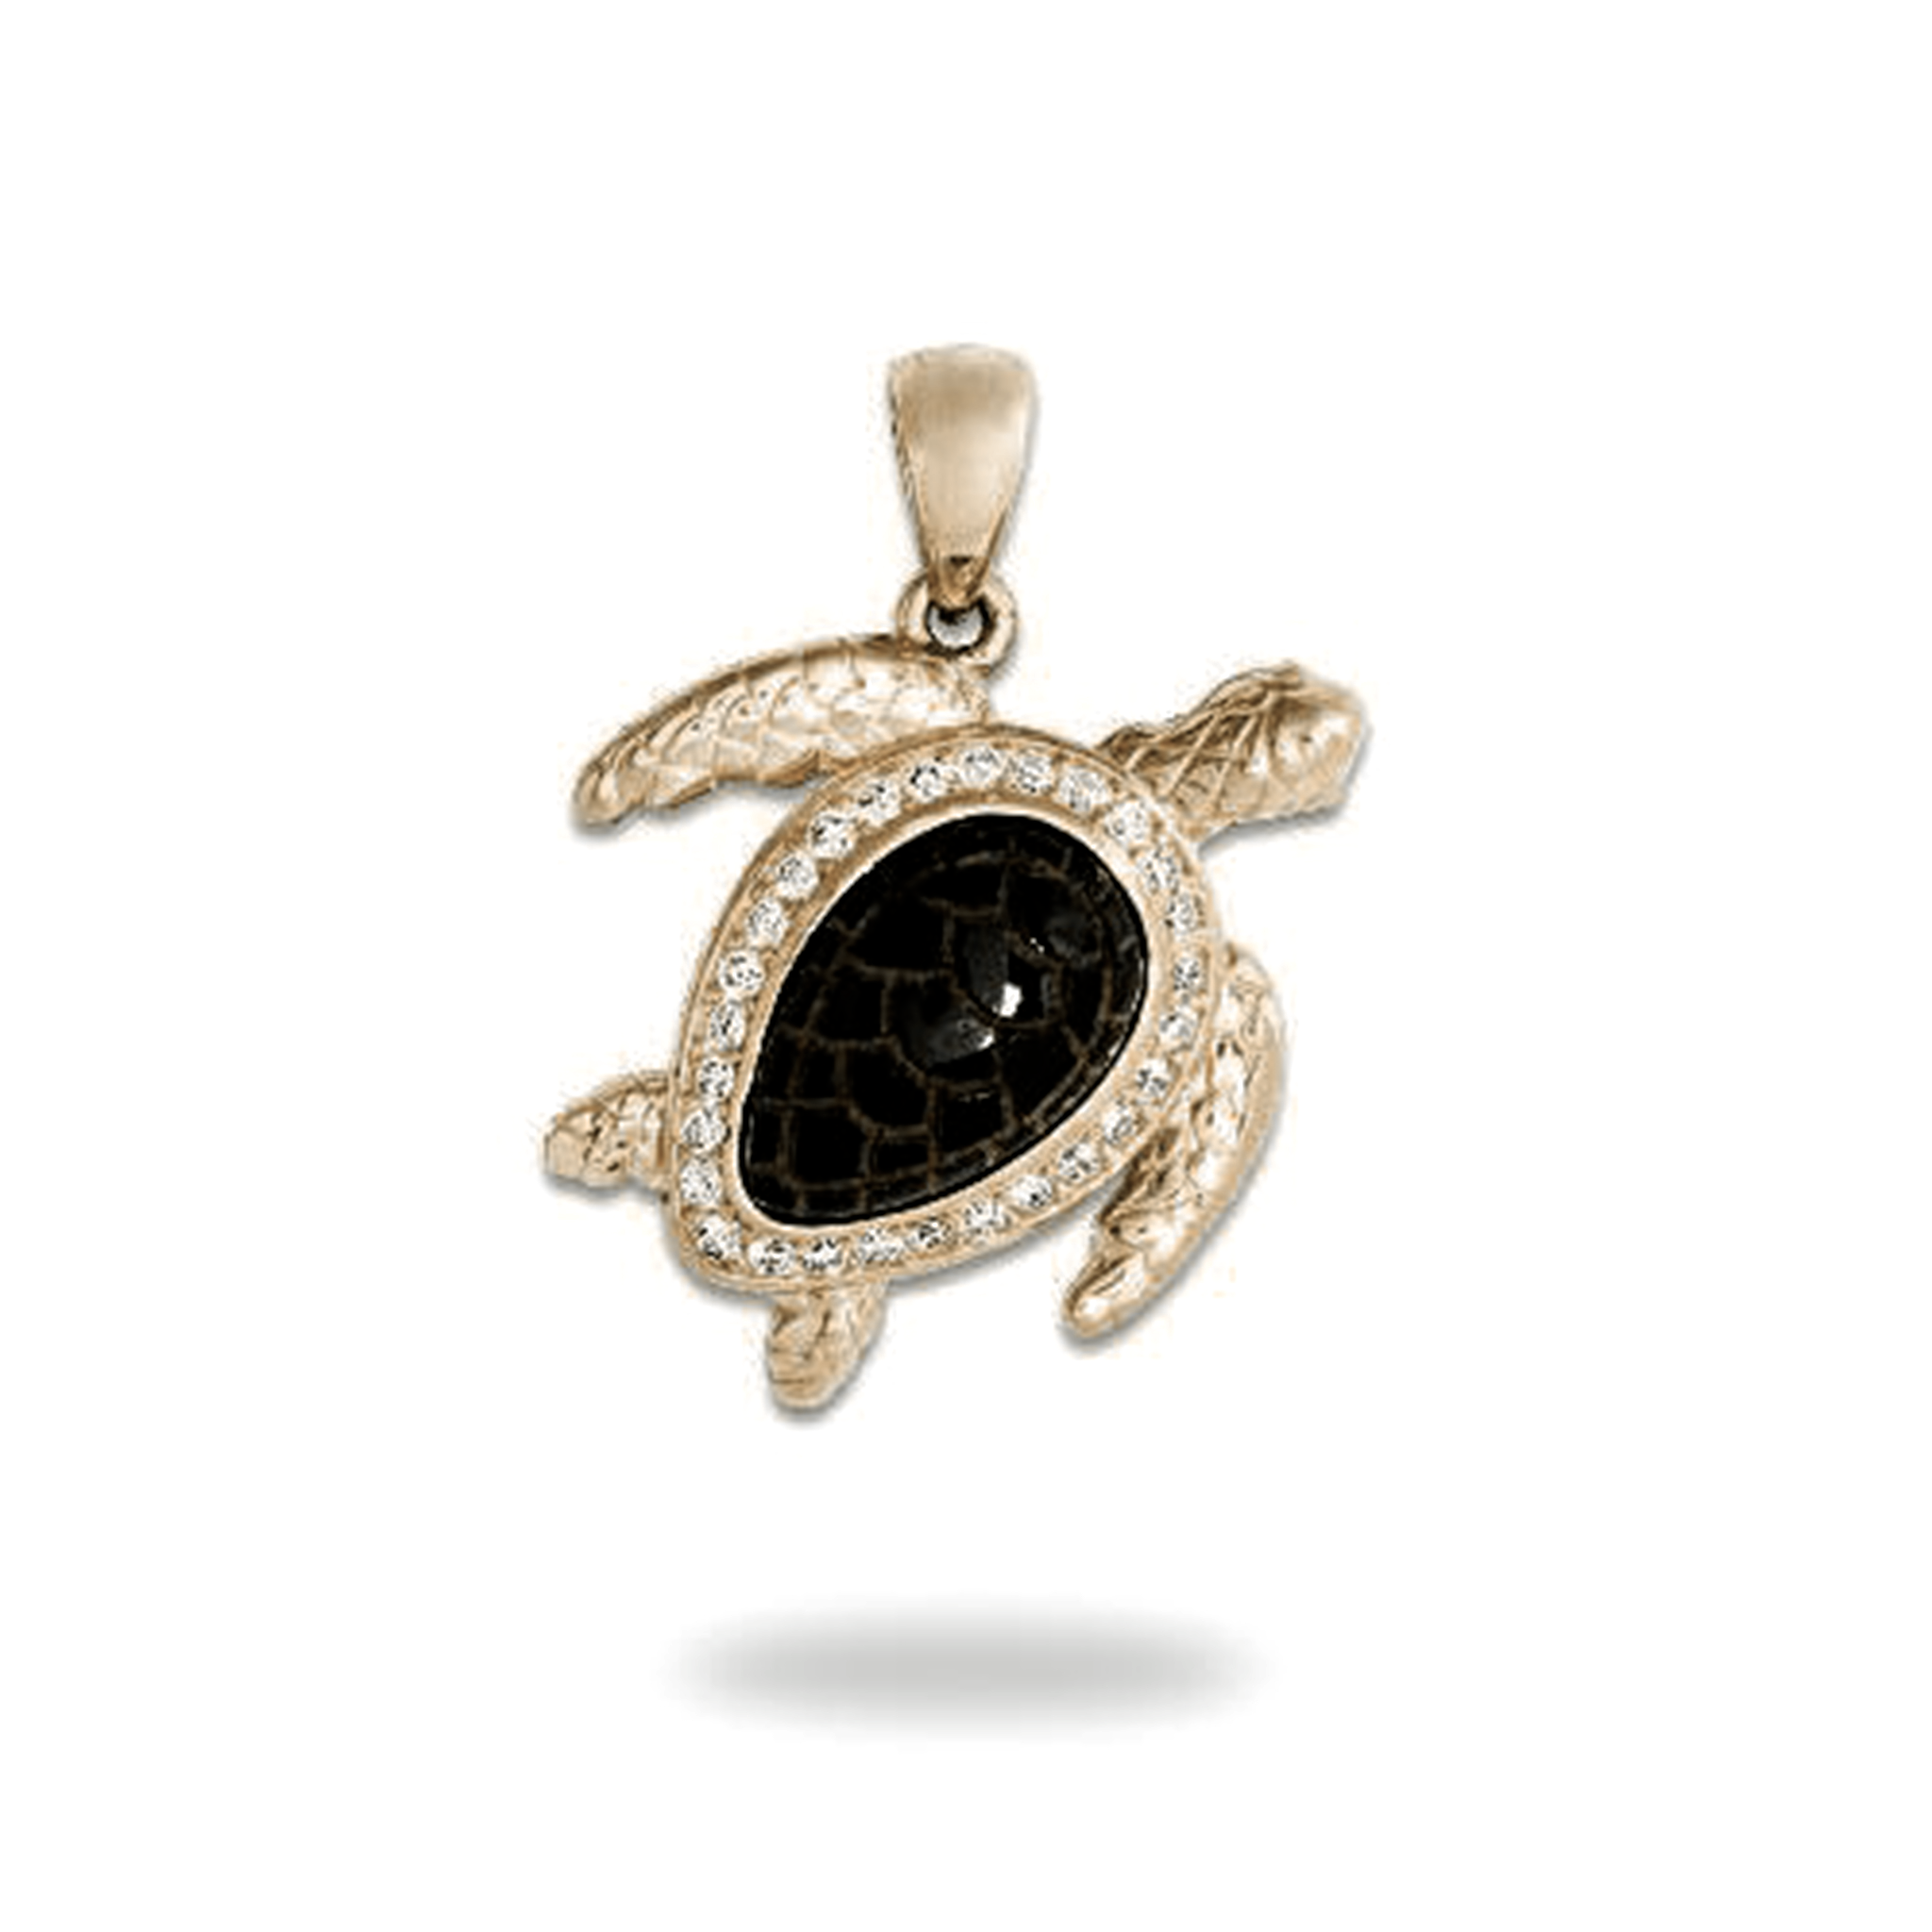 Honu Black Coral Pendant in Gold with Diamonds - 18mm